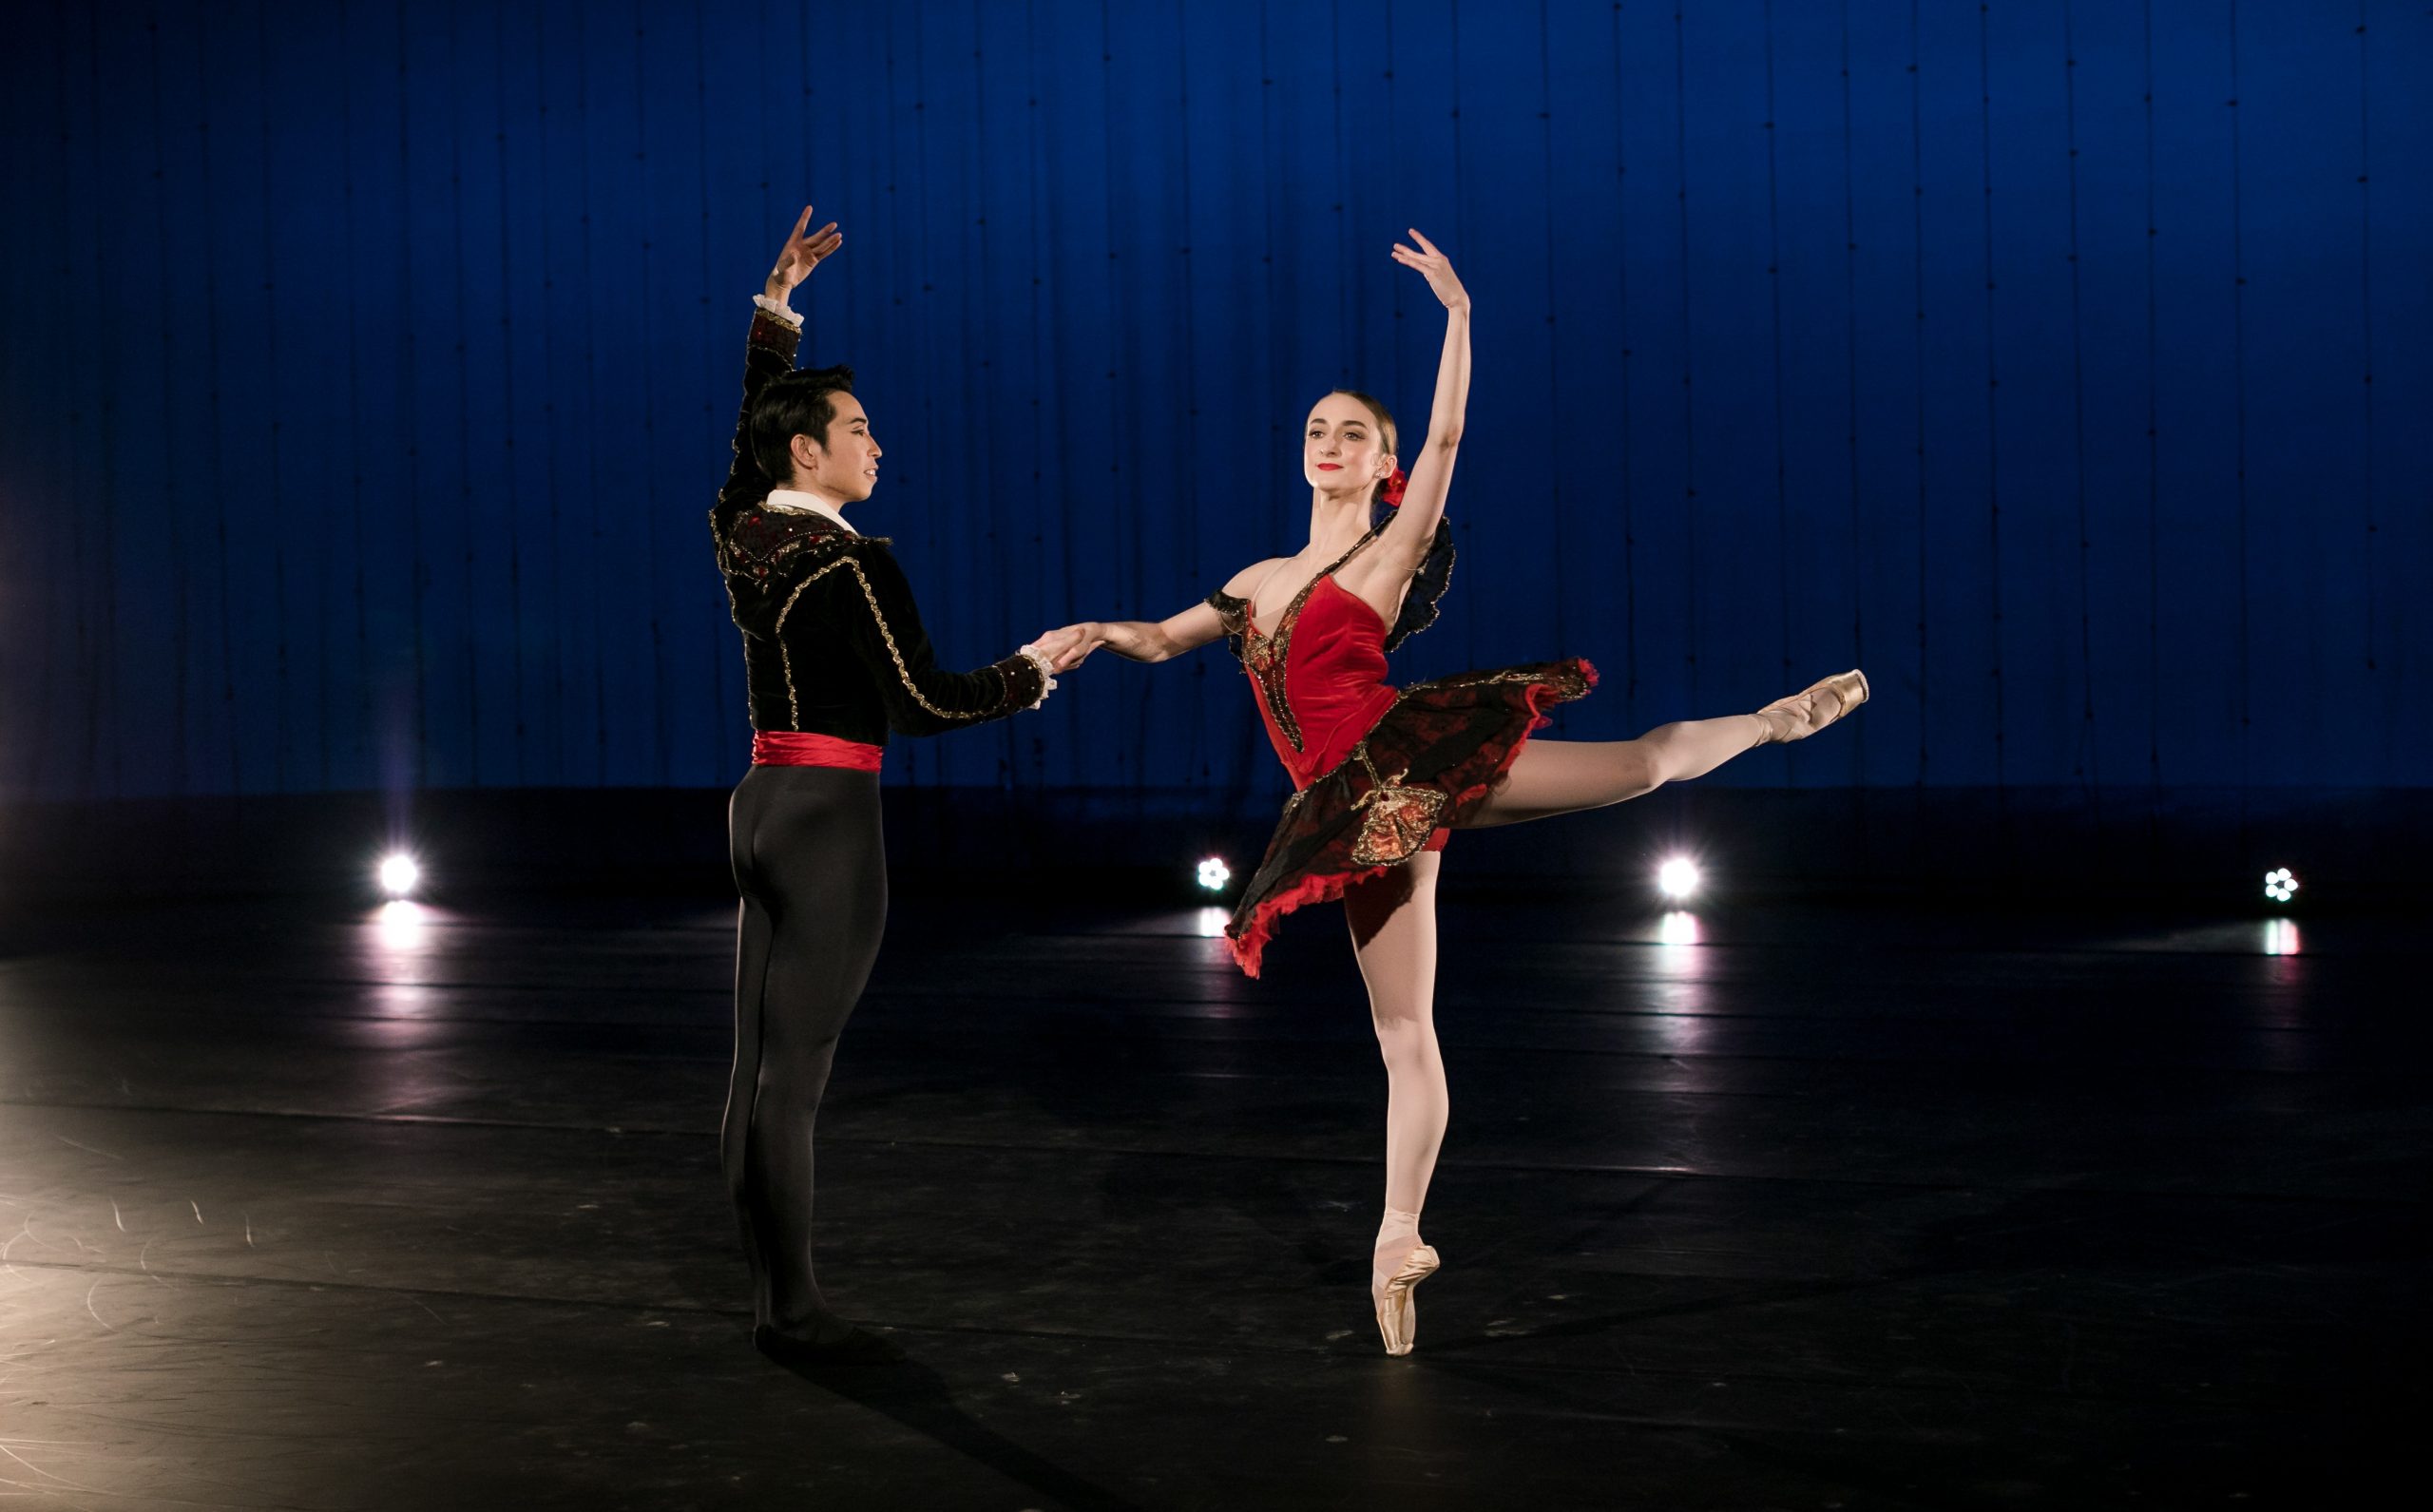 One of the pieces that Pittsburgh Ballet will be performing is from their production of 'Don Quixote.' Pictured are Yoshiaki Nakano and Jessica McCann. (photo: Kelly Petrovich)